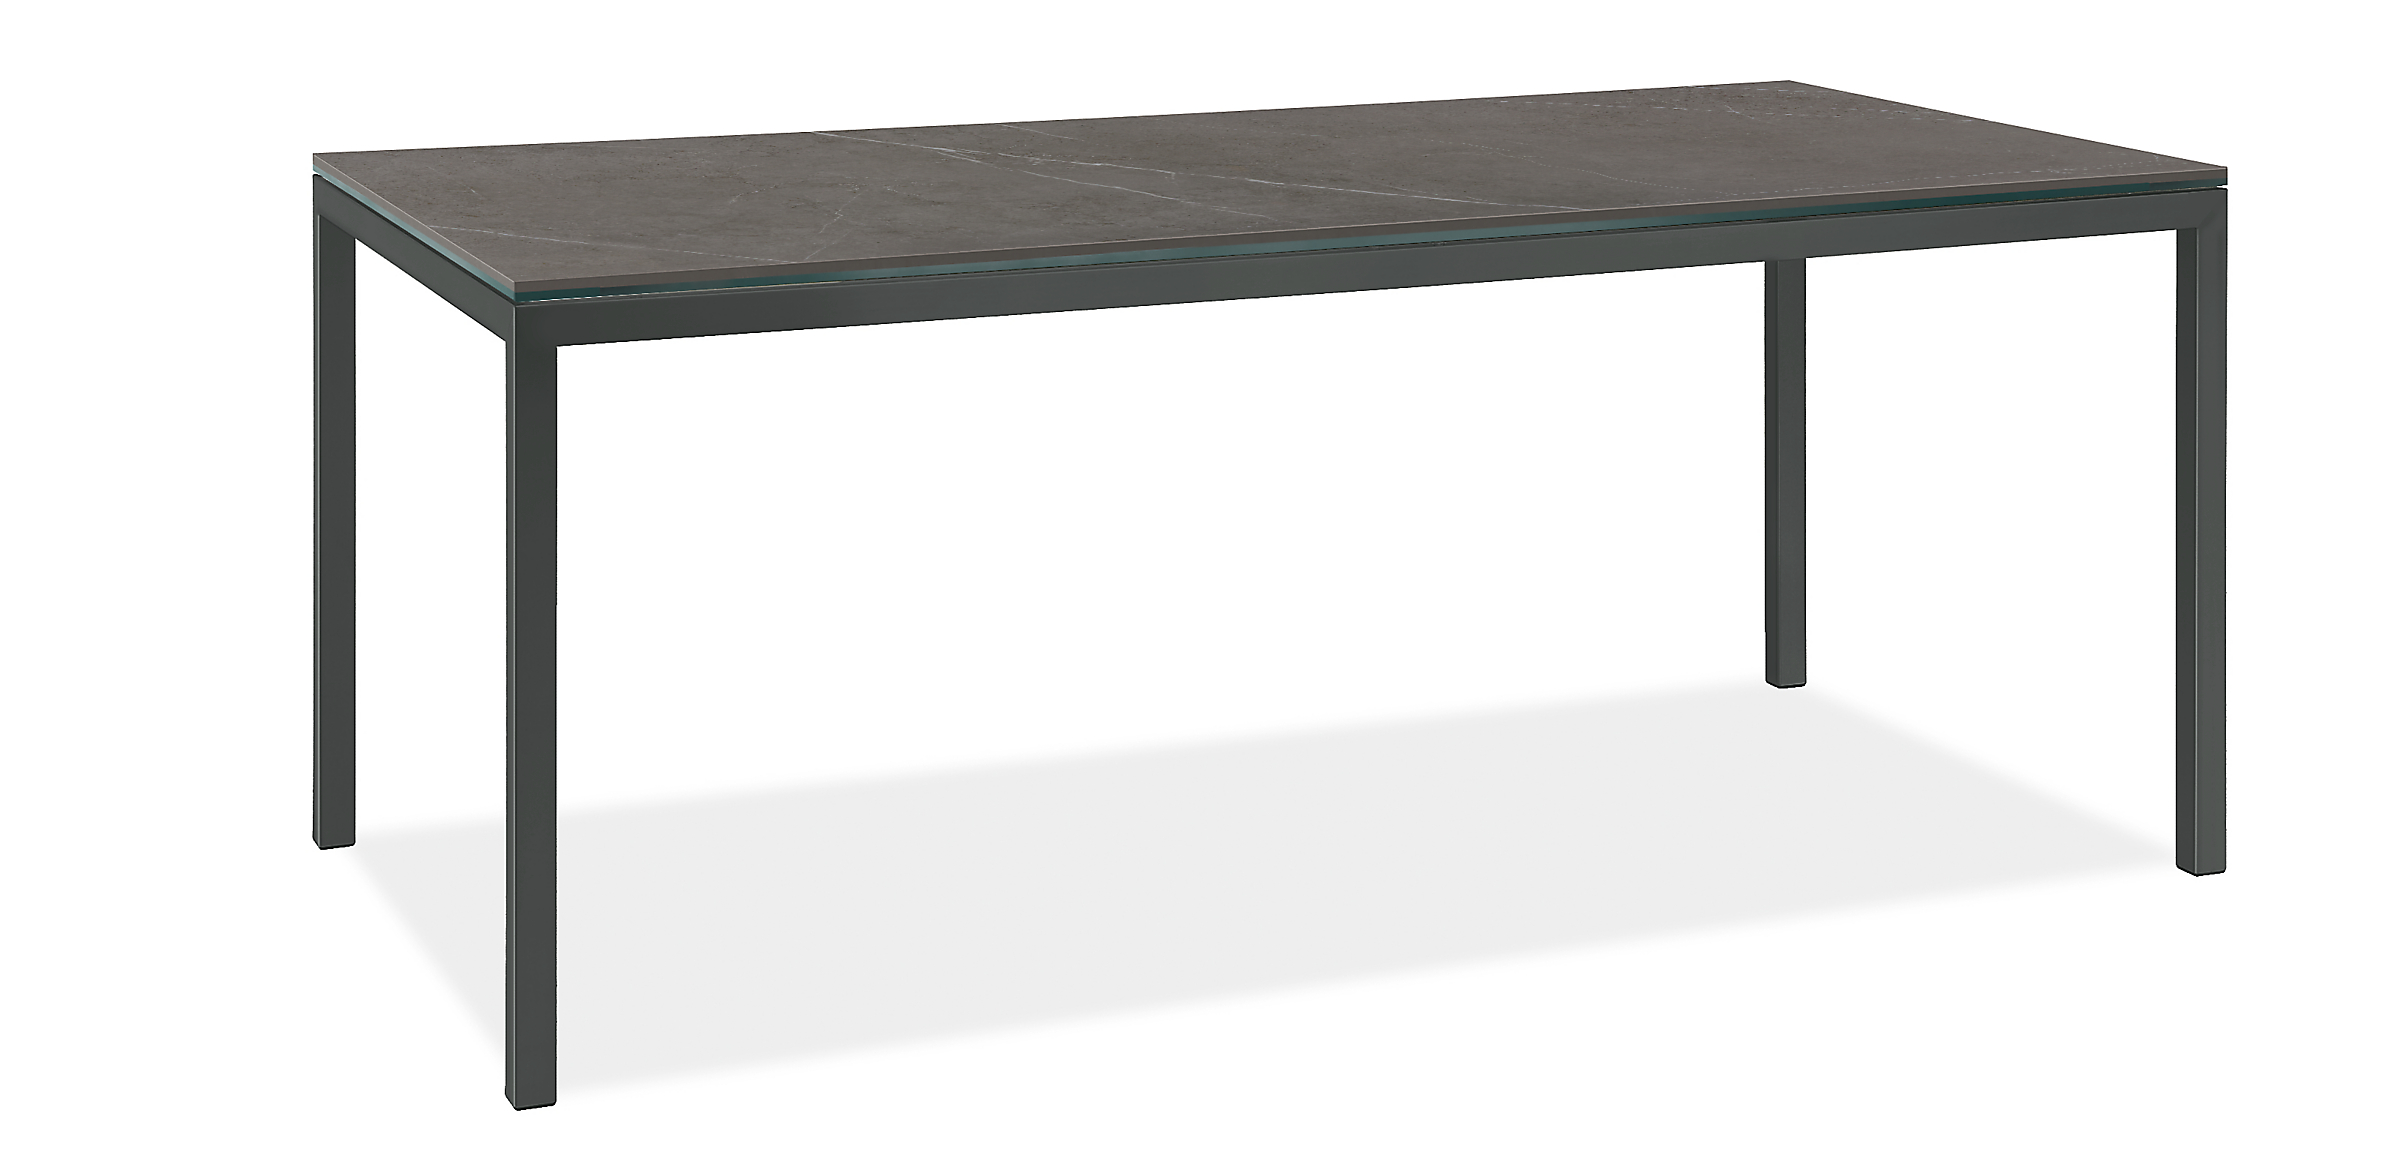 Parsons 72w 36d 29h 1.5" Table in Graphite with Marbled Grey Ceramic Top